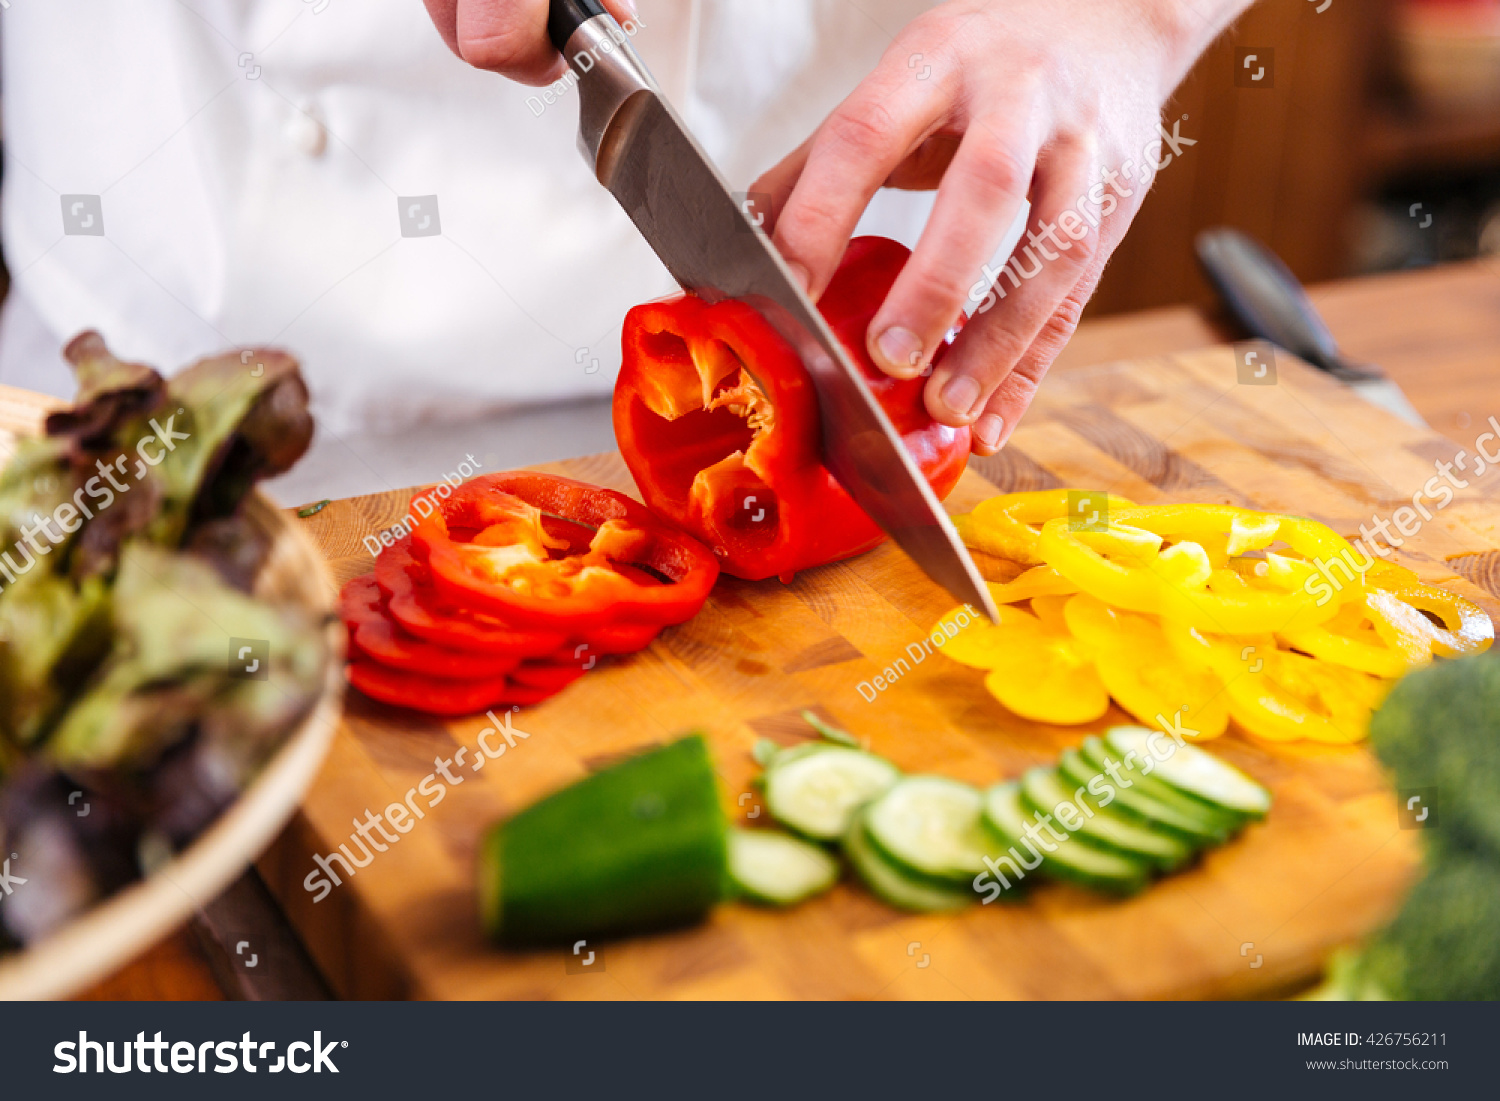 Closeup of hands of chef cook cutting vegetables on wooden table  #426756211